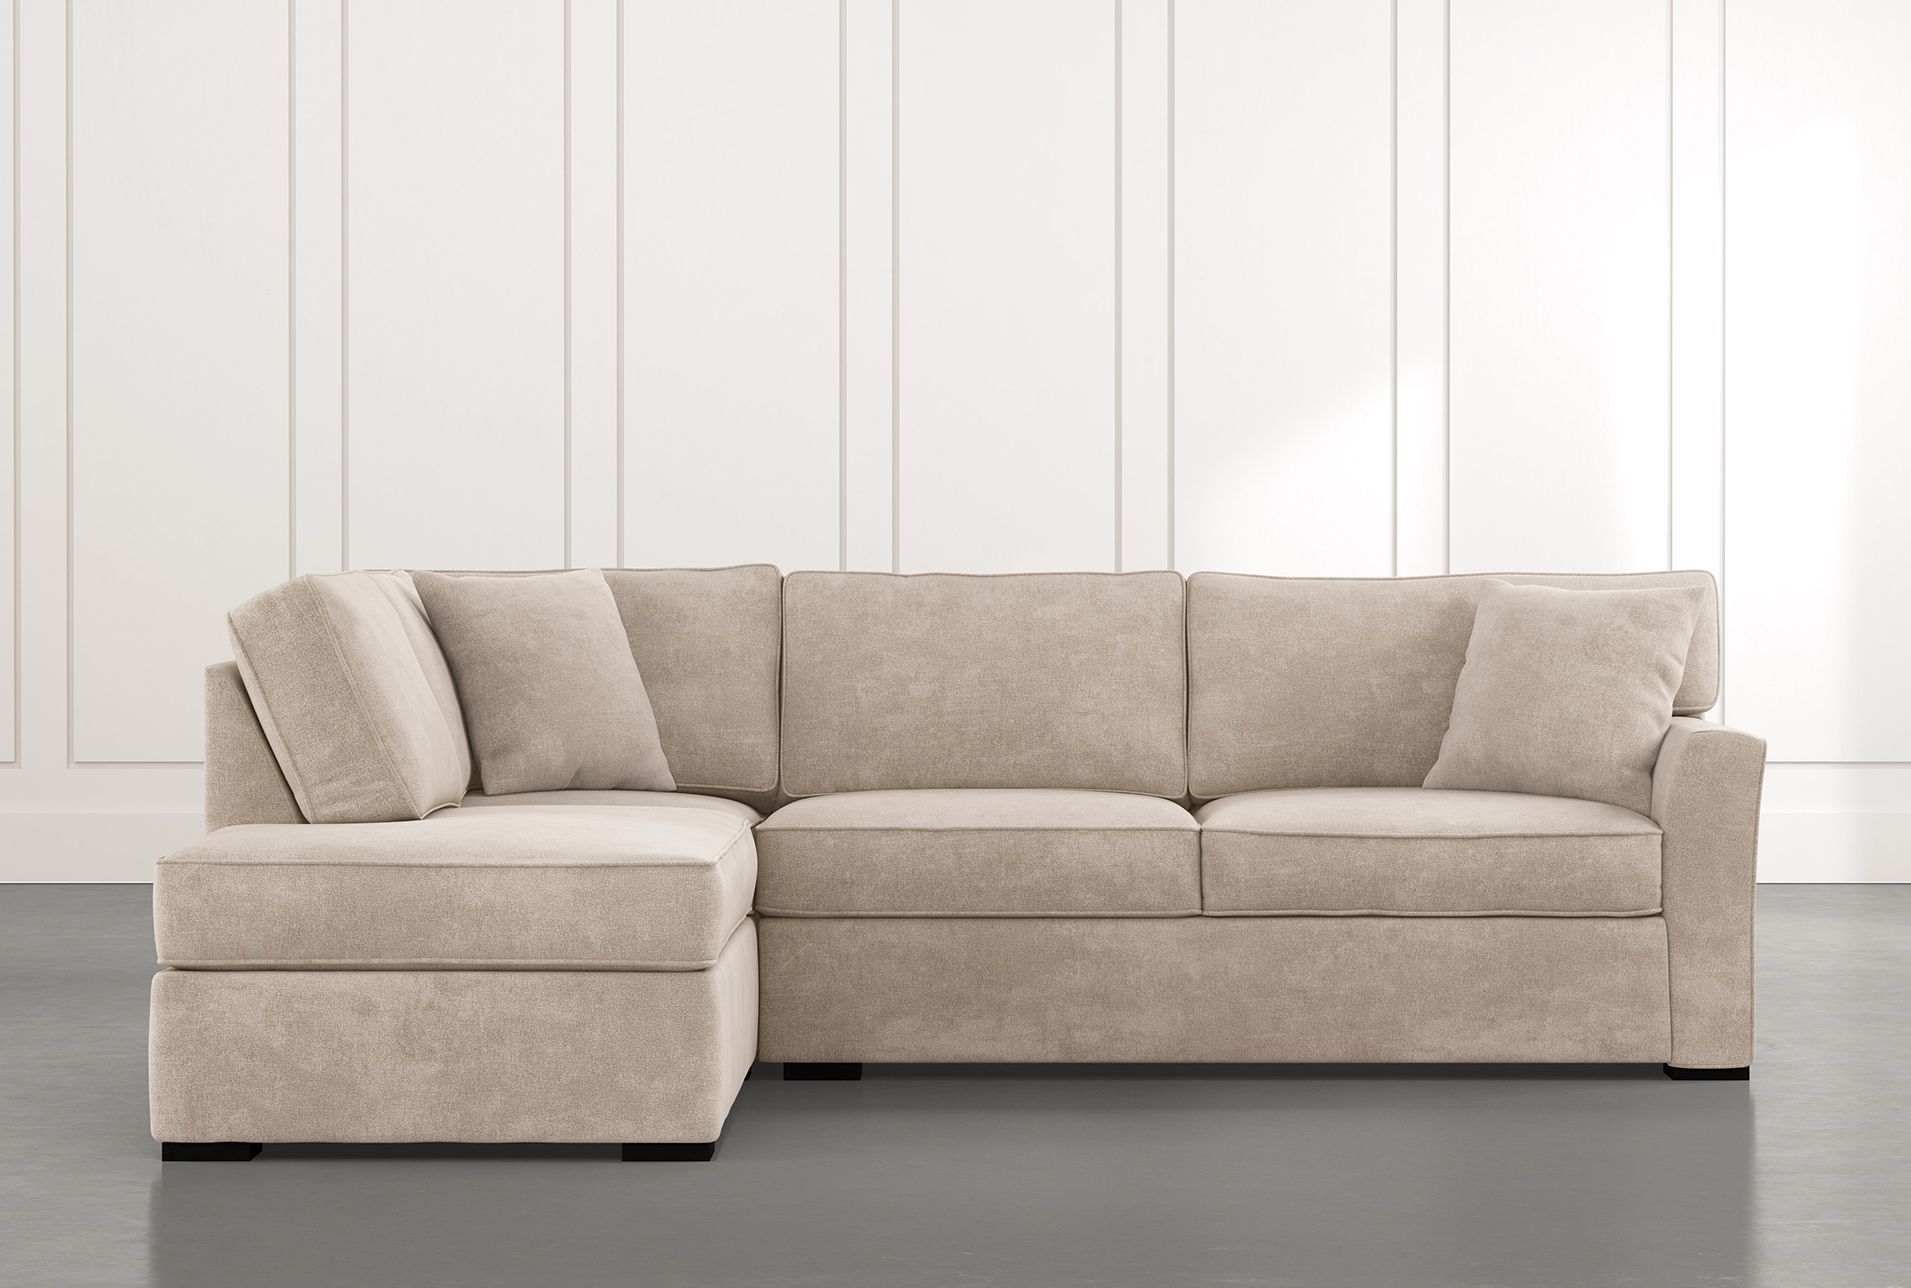 Aspen Beige 2 Piece Sleeper Sectional With Left Arm Facing Chaise Inside Left Or Right Facing Sleeper Sectionals (View 20 of 21)